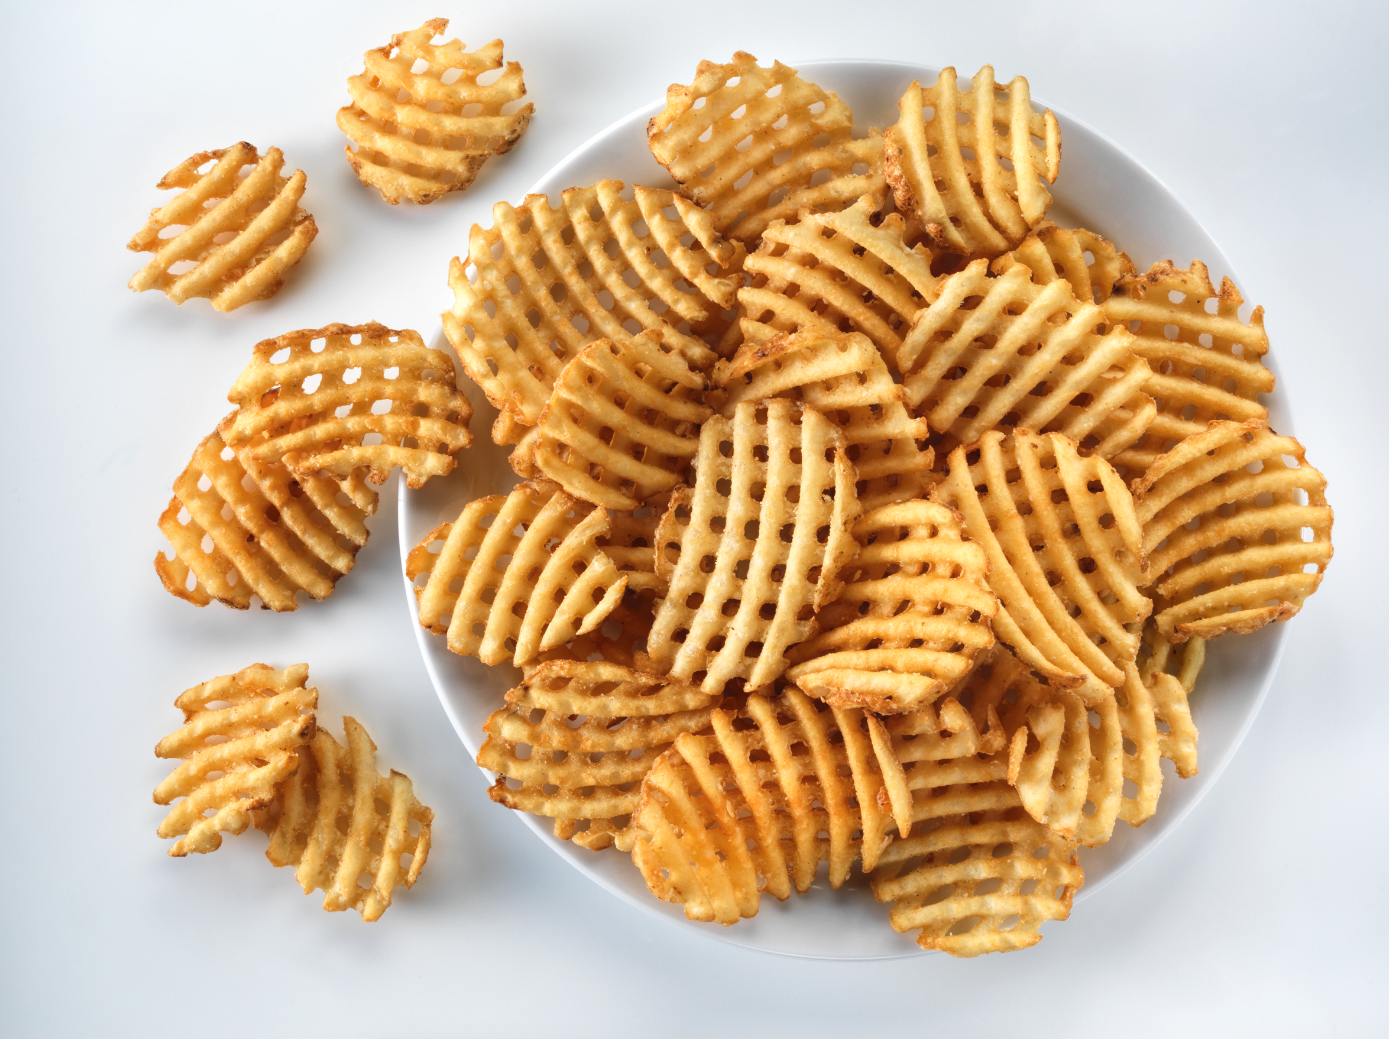 A plate of waffle fries on a white surface.